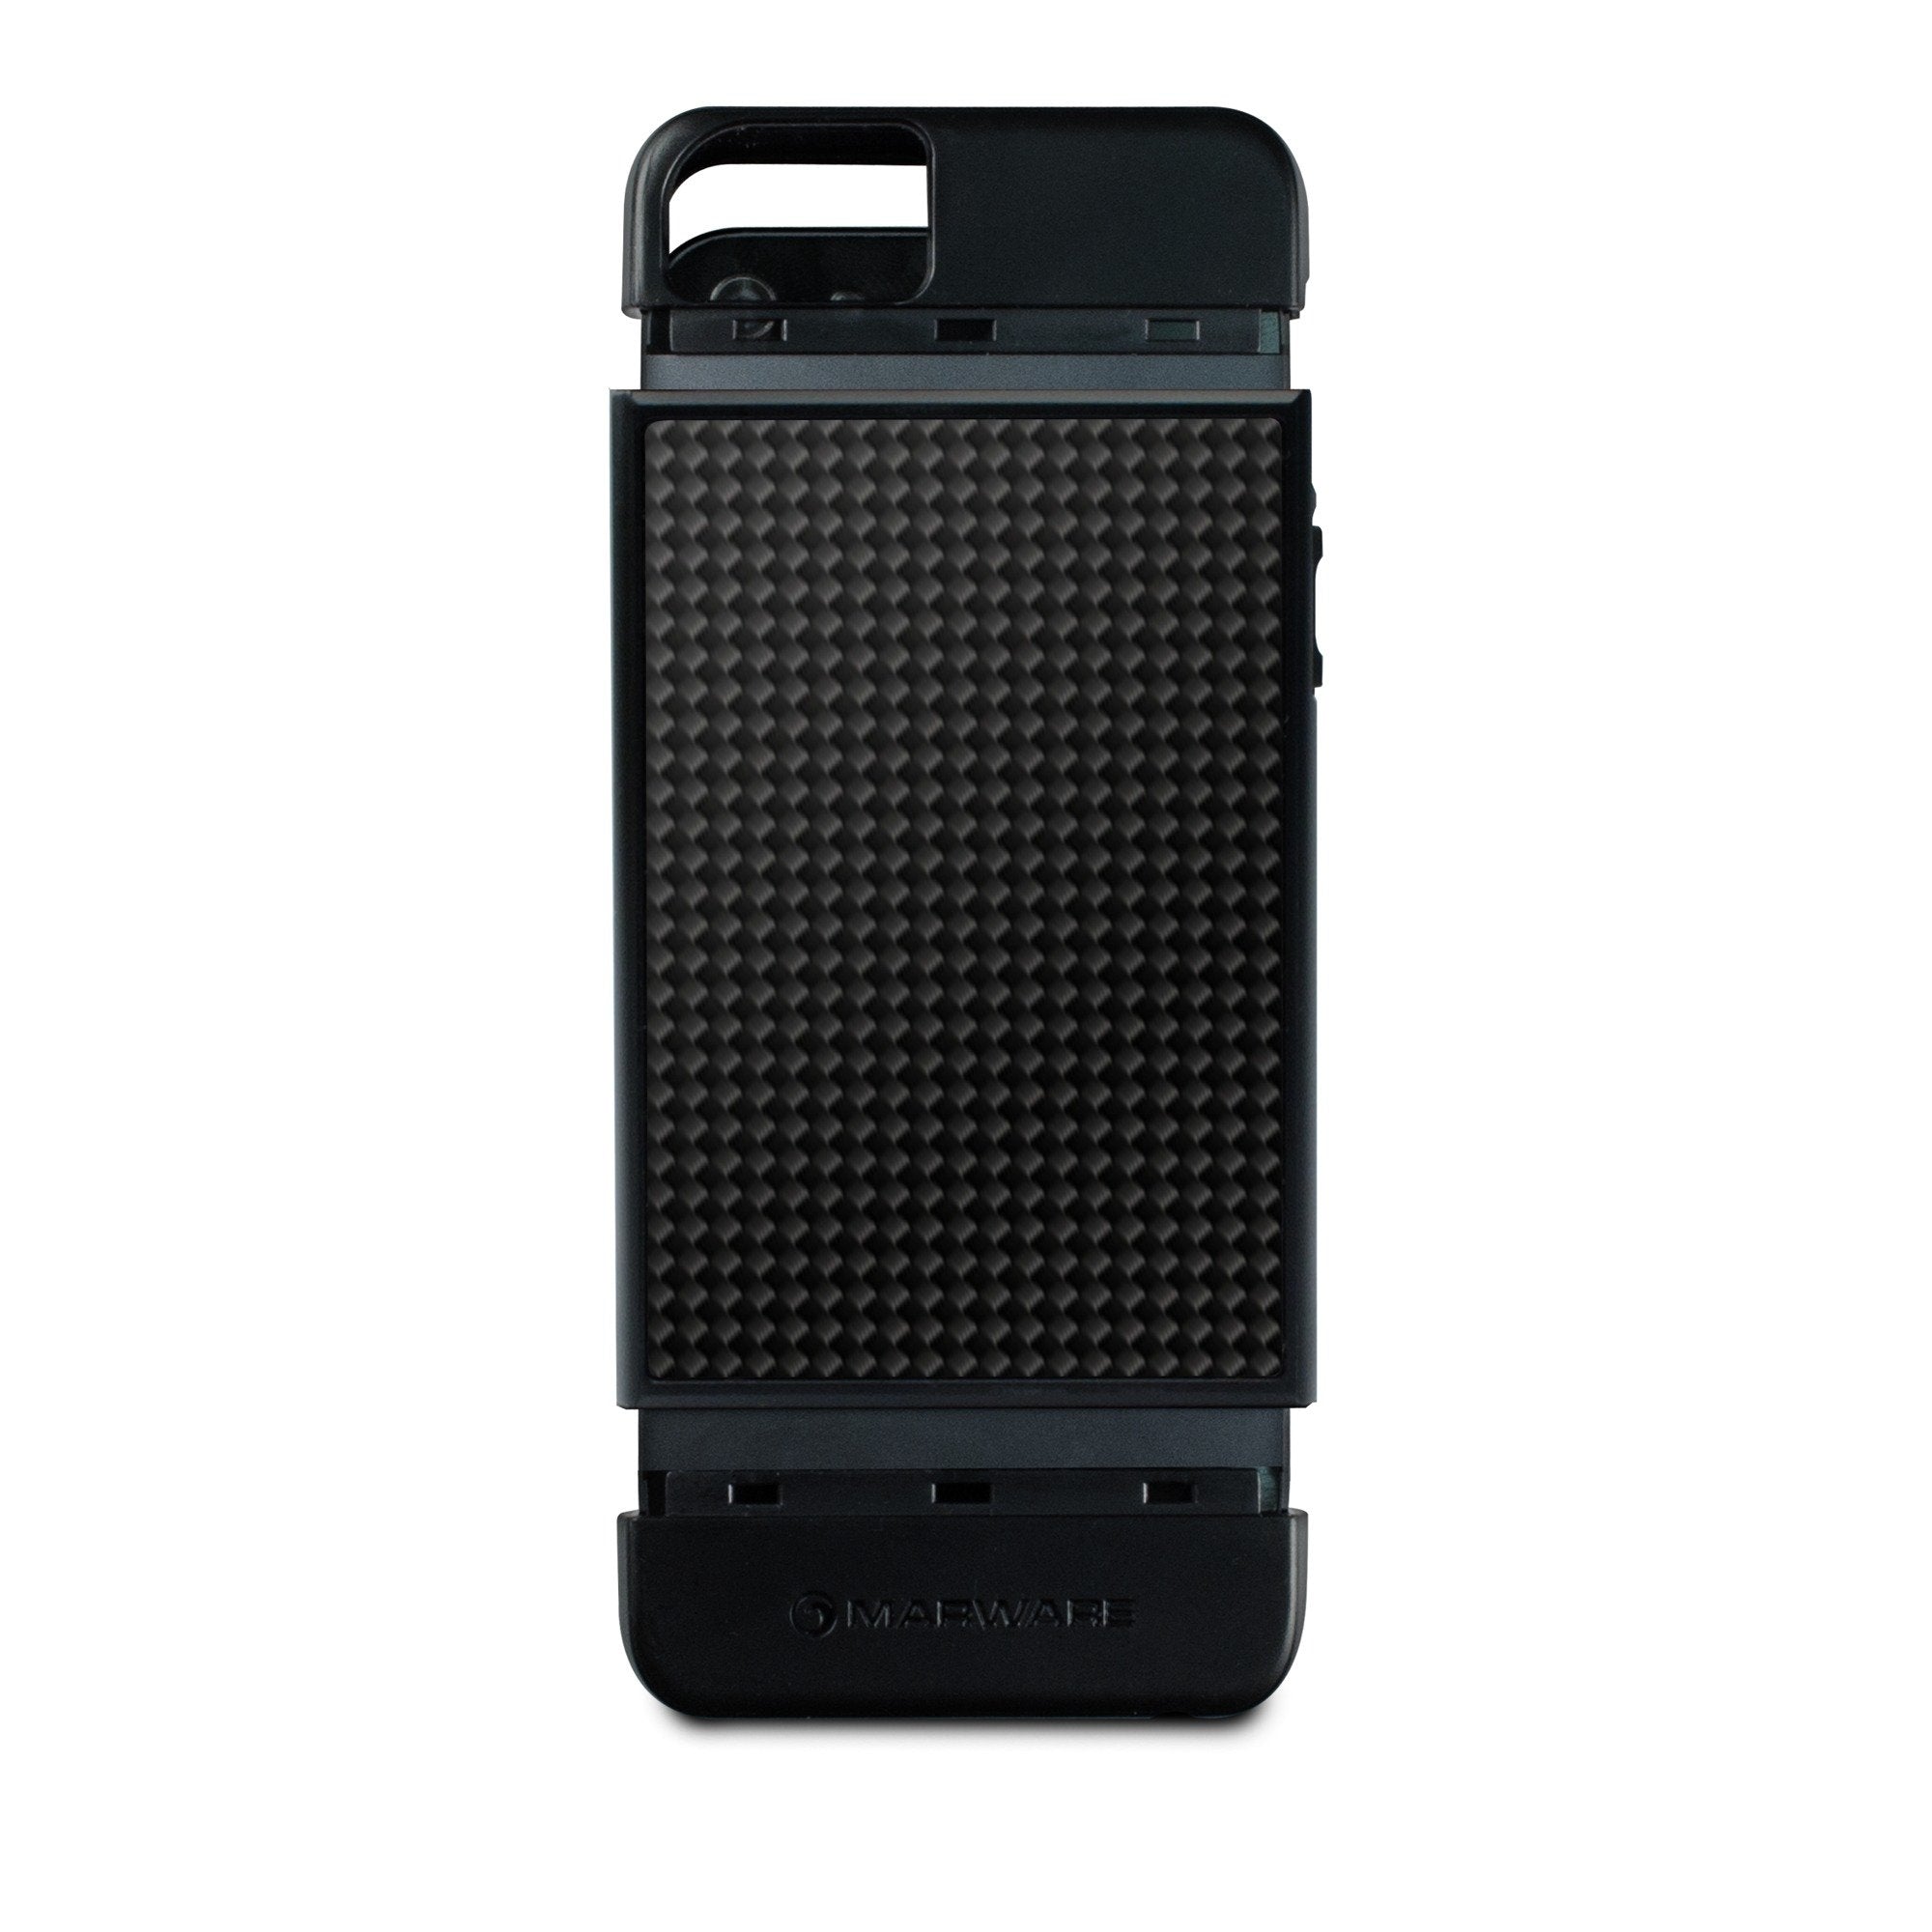 Marware ADRE1029 rEVOLUTION for iPhone 5 - 1 Pack - Retail Packaging - Black